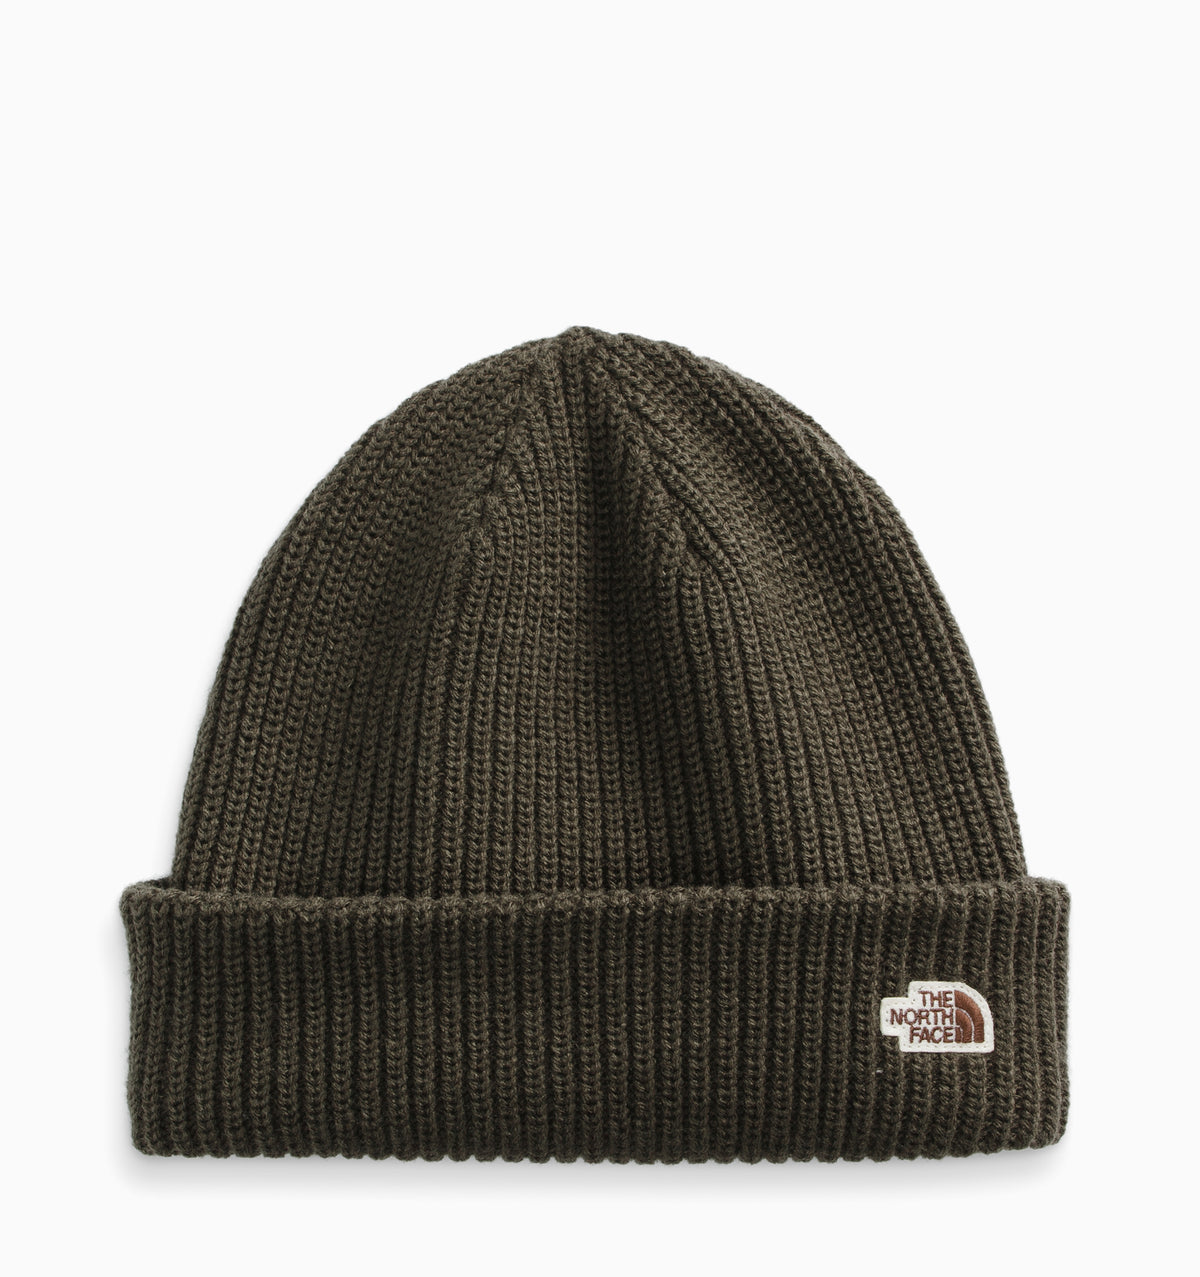 The North Face Salty Dog Beanie - New Taupe Green